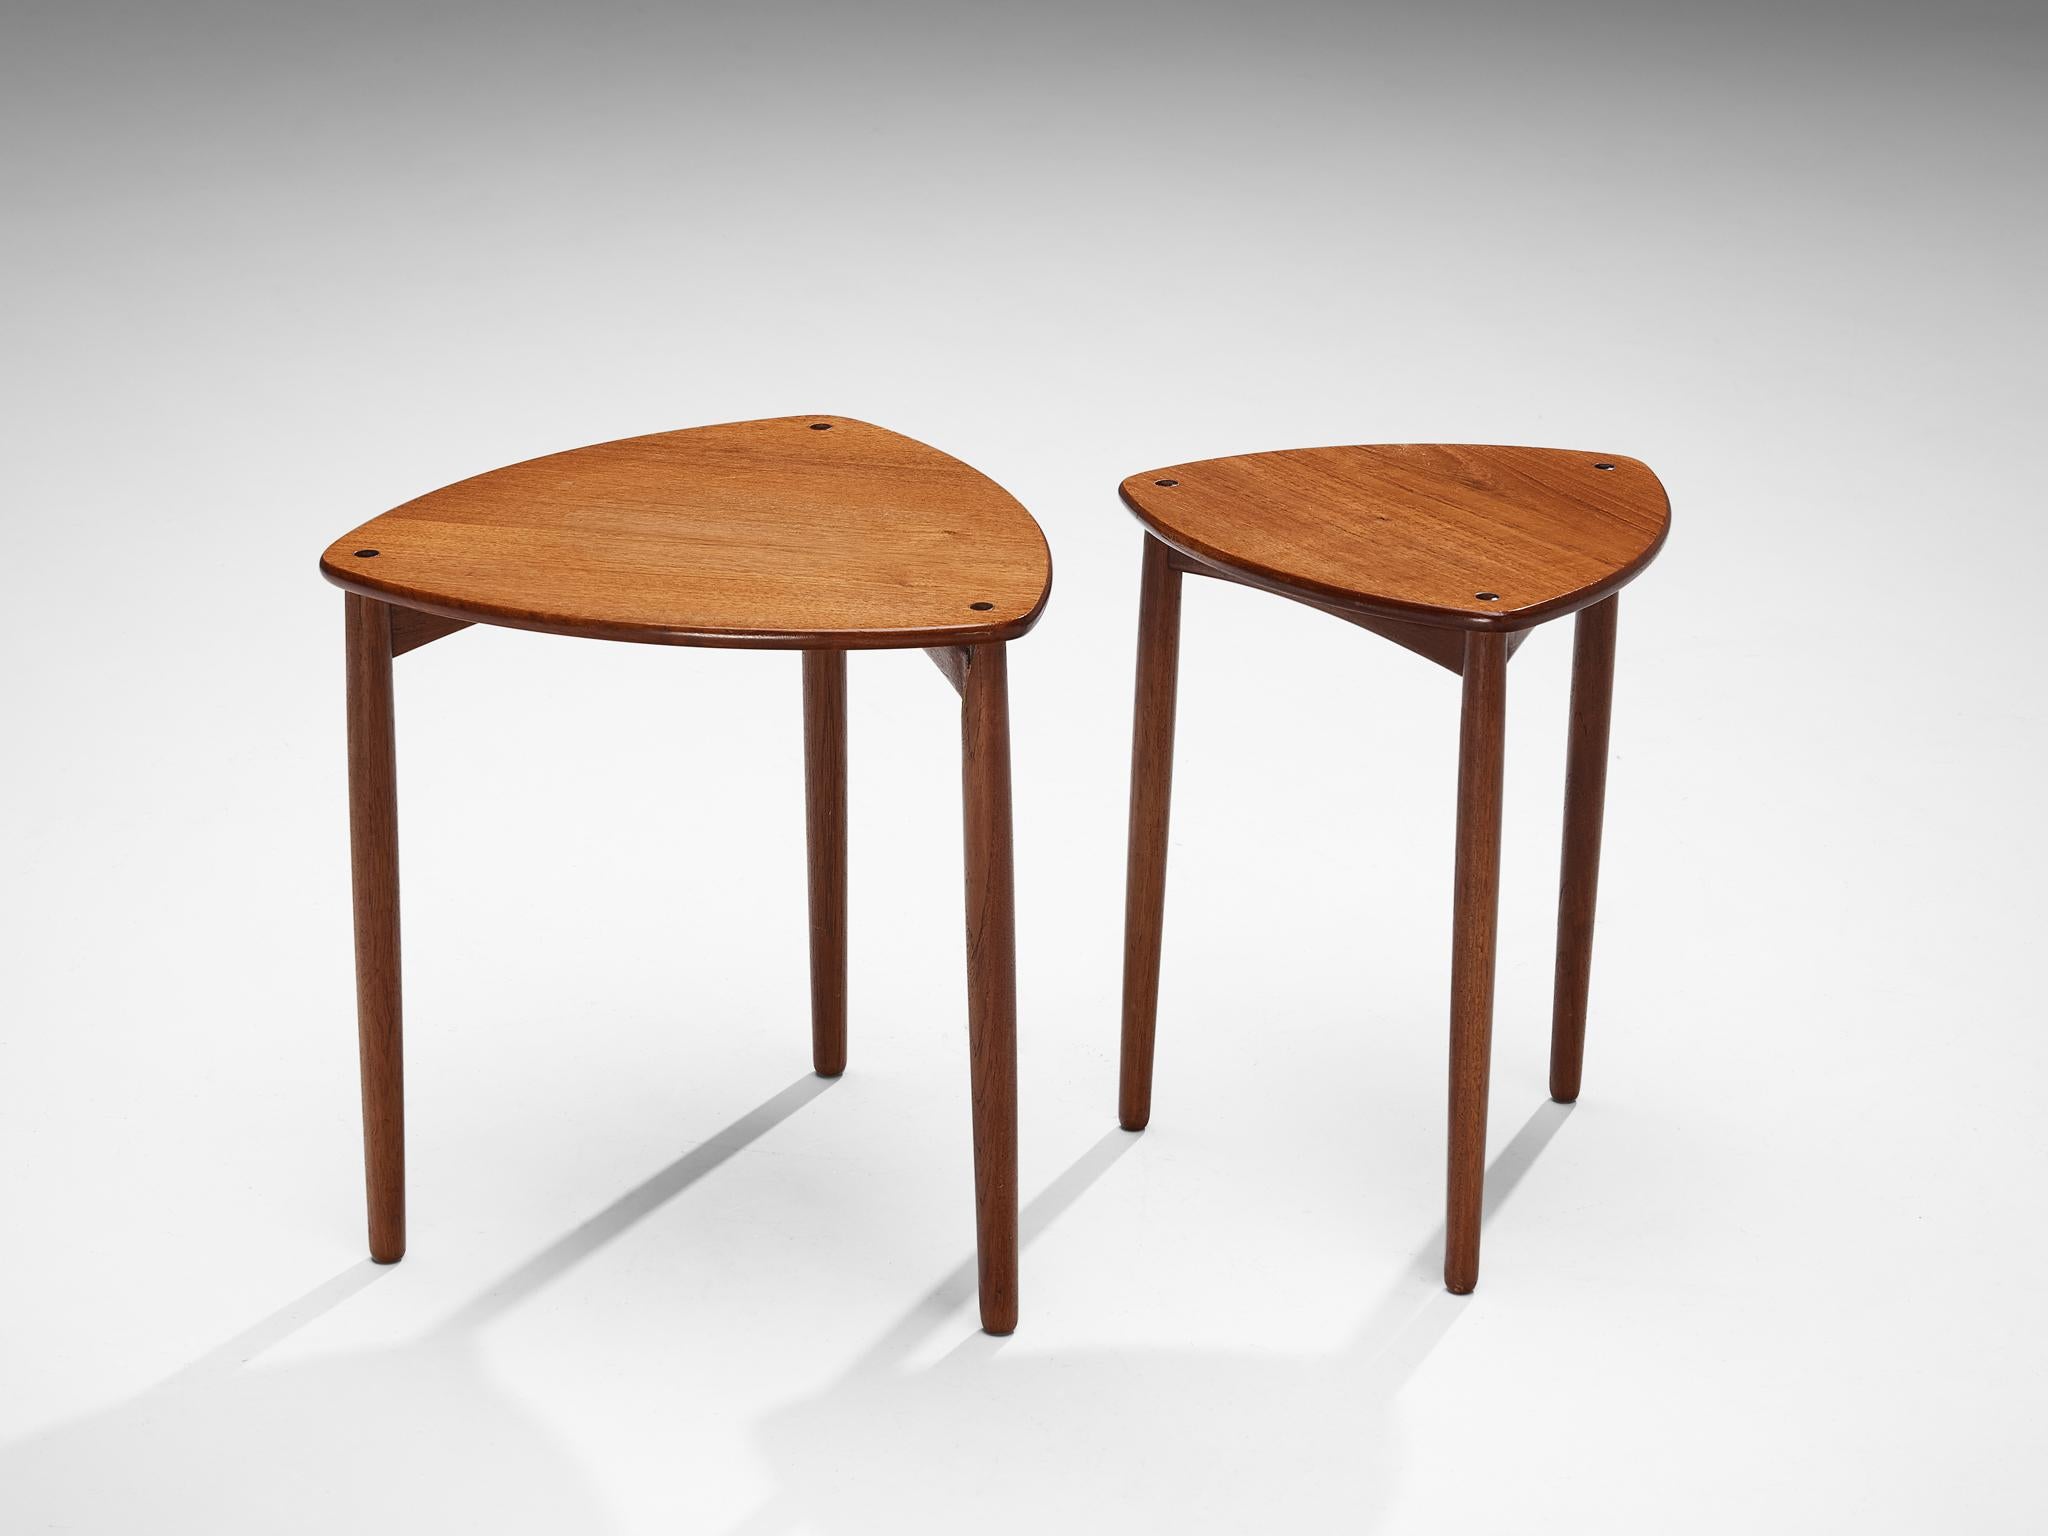 Ejner Larsen and Aksel Bender Madsen for Willy Beck, pair of nesting tables, teak, Denmark, 1950s.

Elegant pair of nesting tables by the Danish designer duo Ejner Larsen and Aksel Bender Madsen. Each table has a triangular shaped top with a soft,